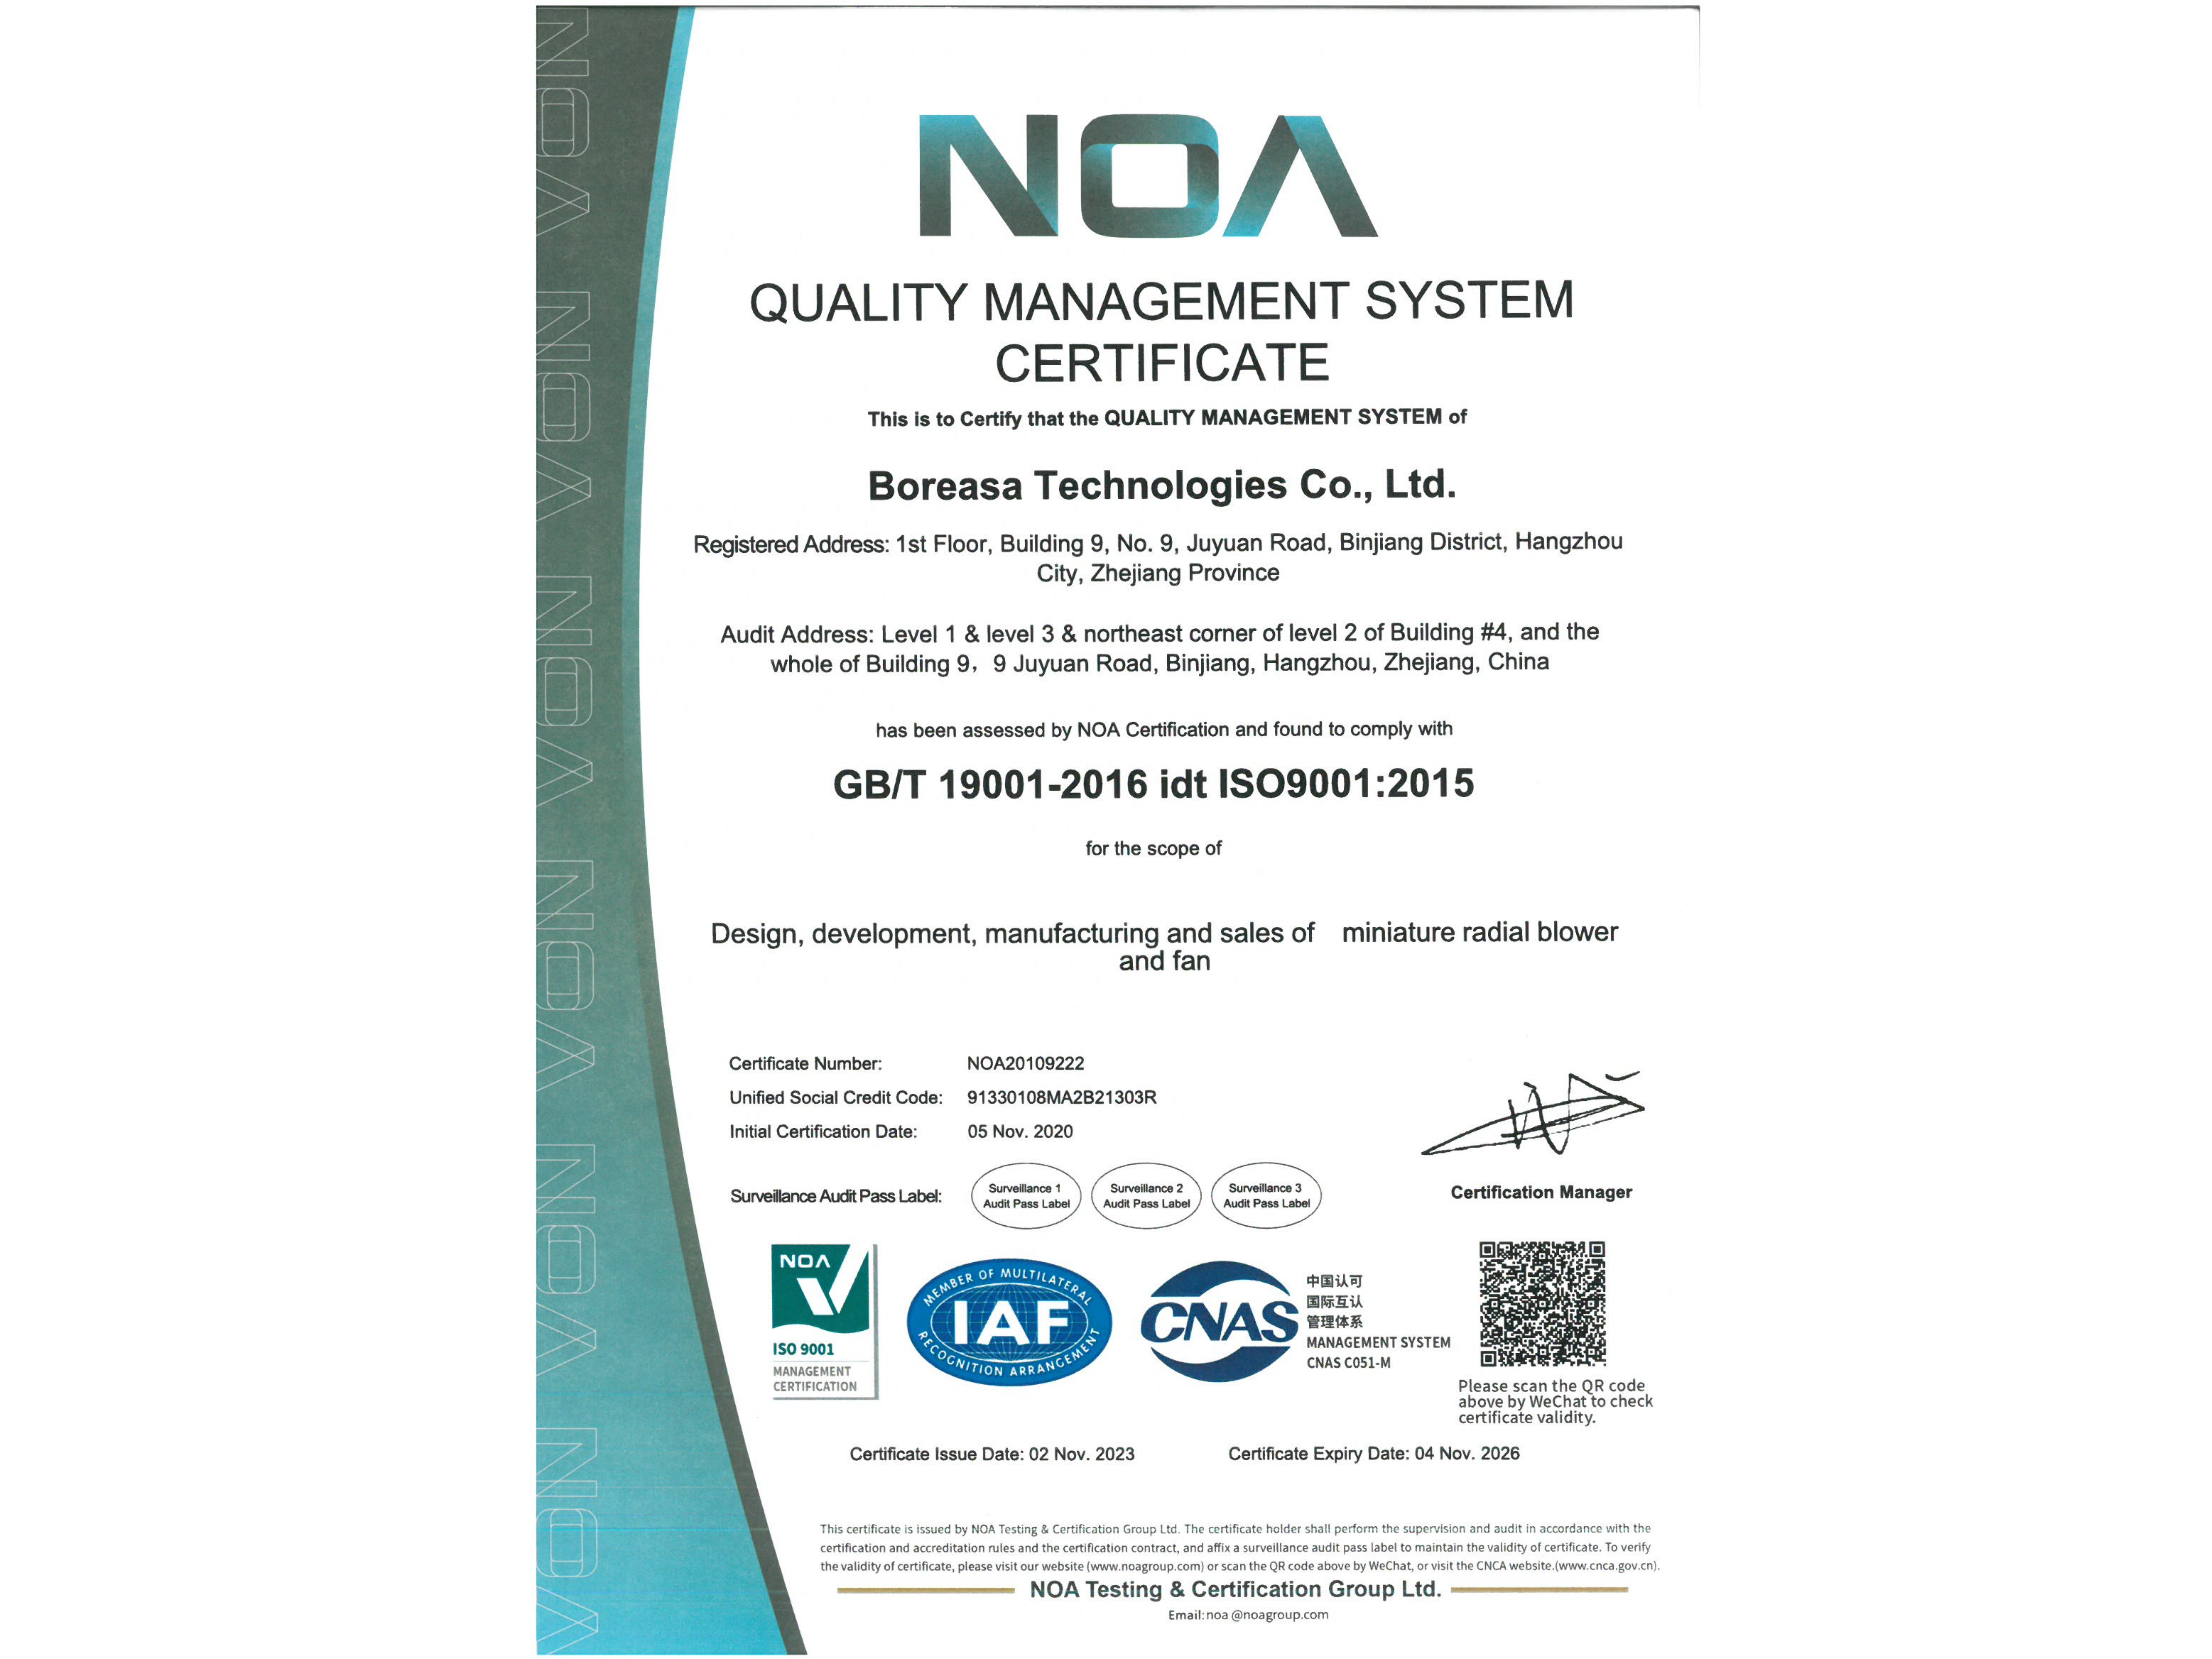 Boreasa passed the annual audit to confirm its ISO9001:2015 certification